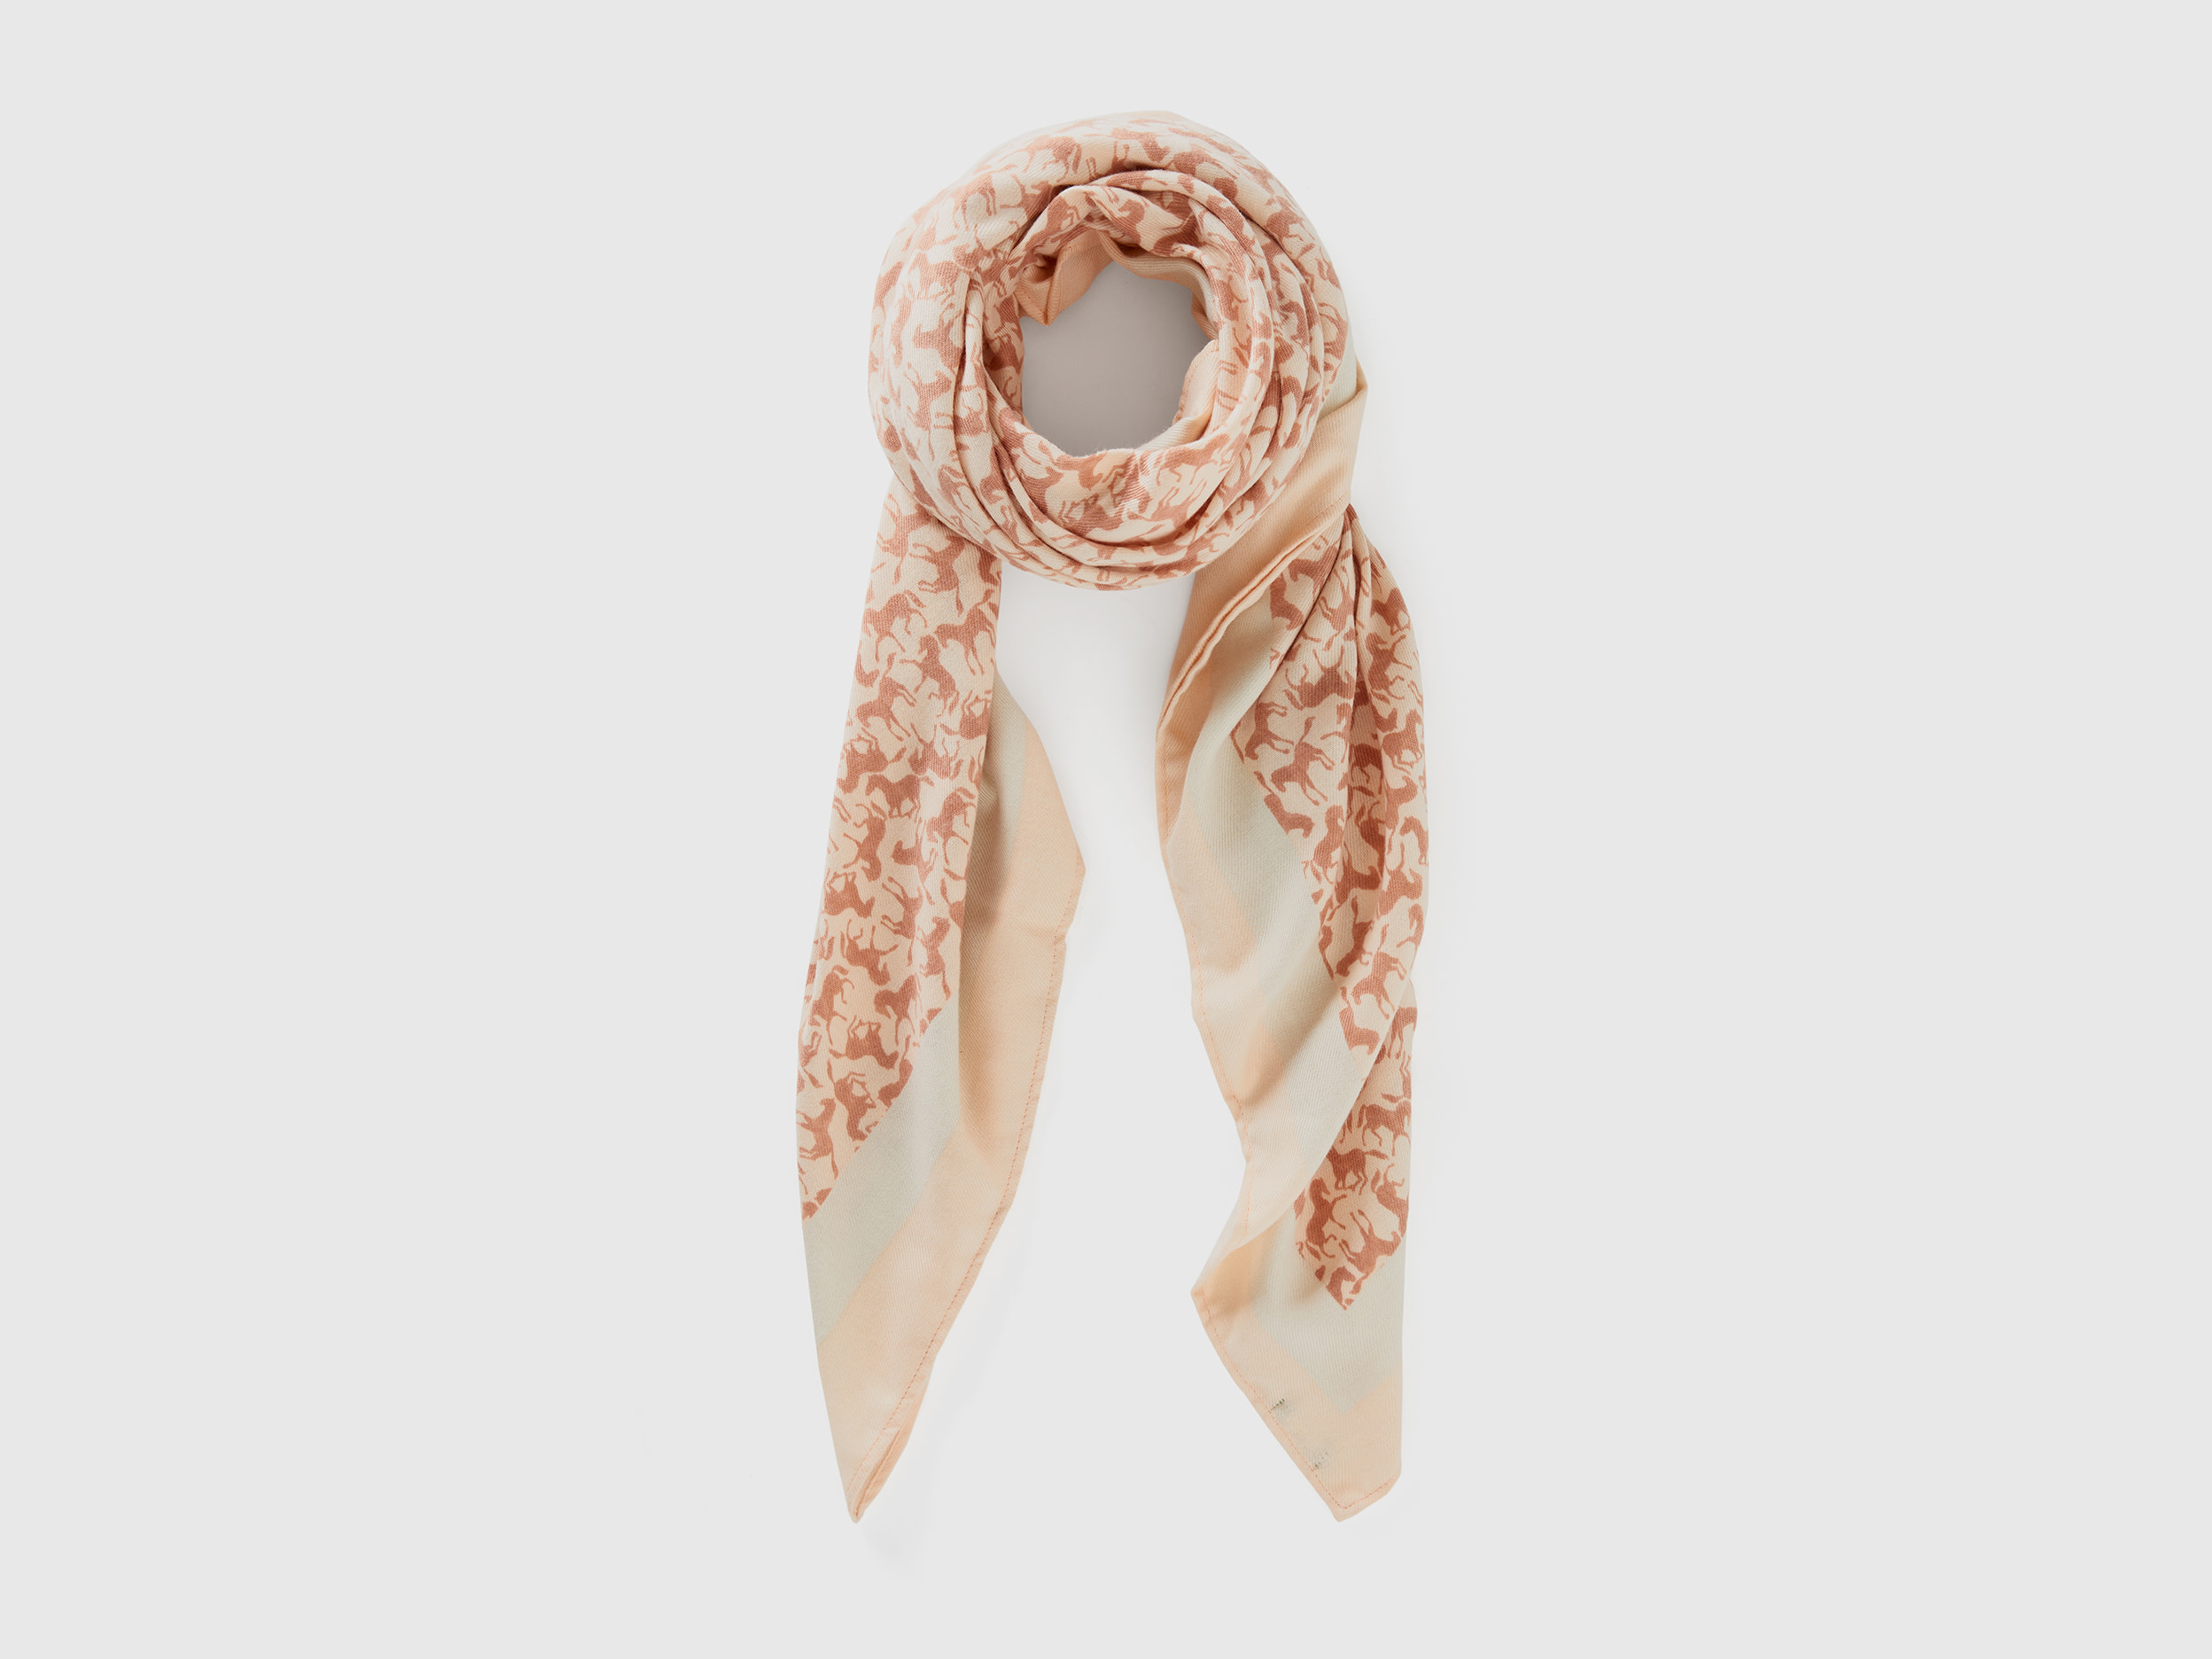 Benetton, Flesh Pink Scarf With Horse Print, size OS, Nude, Women